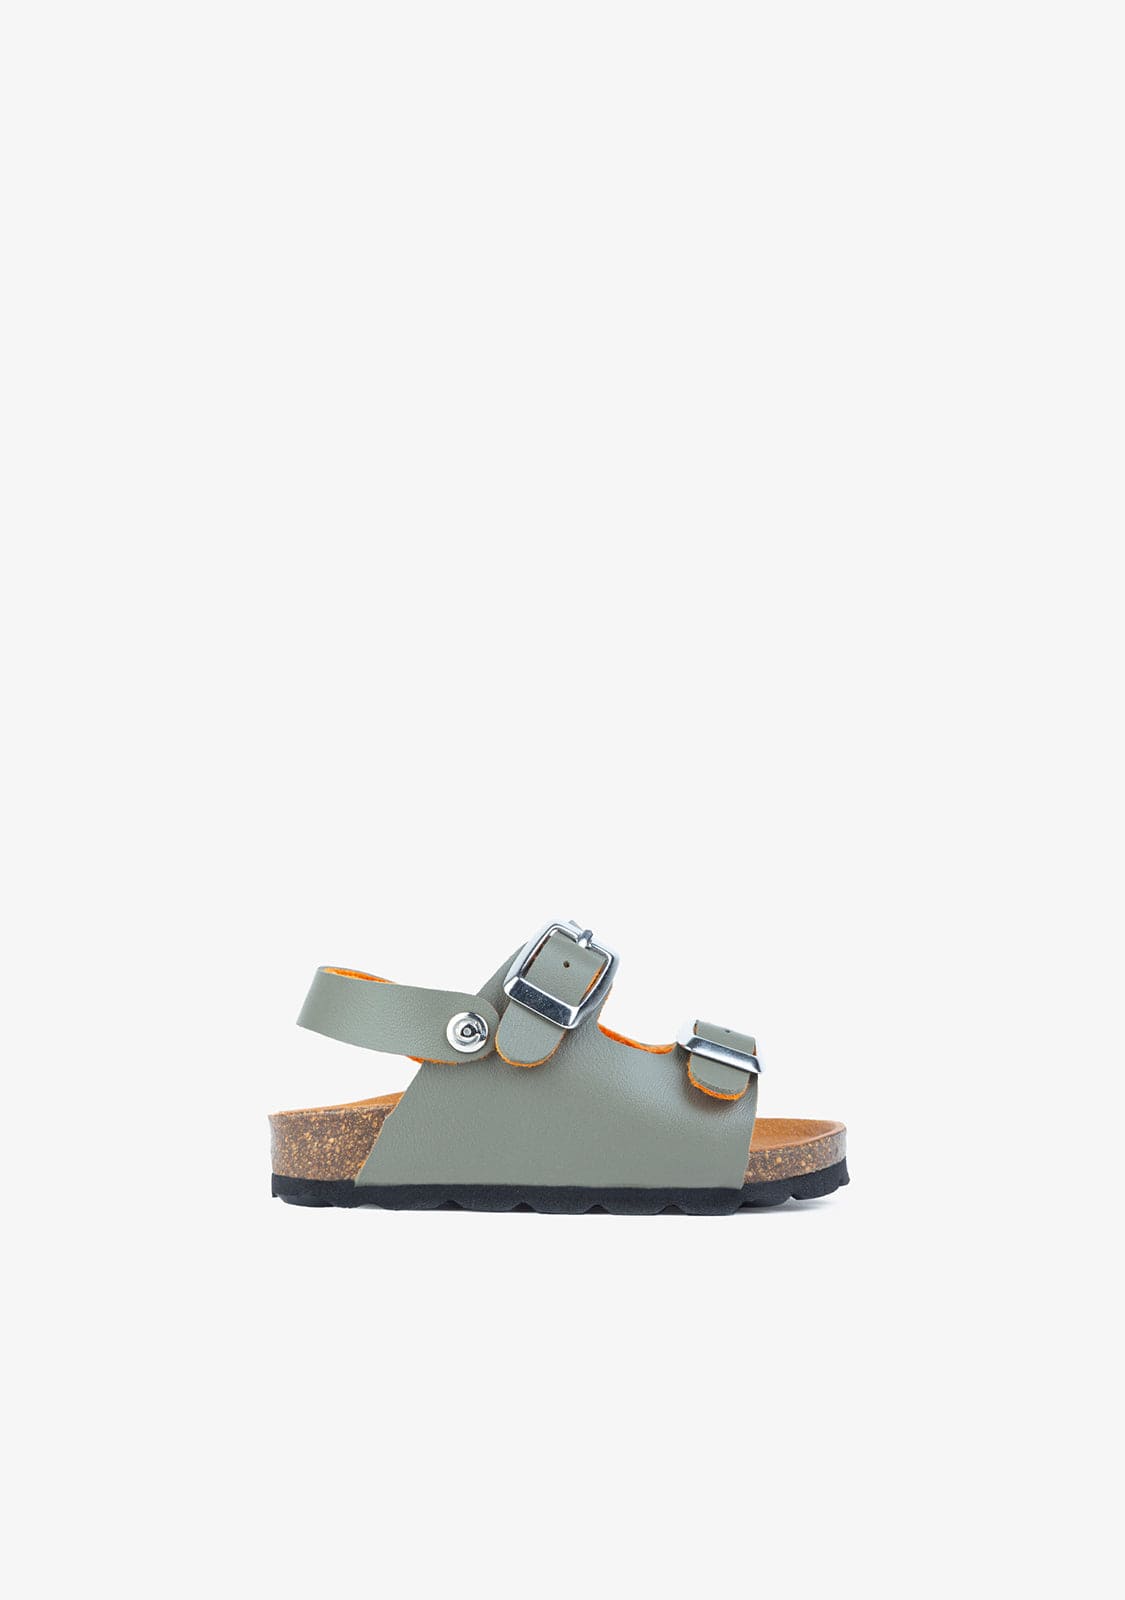 OSITO Shoes Baby's Khaki Synthetic Bio Sandals